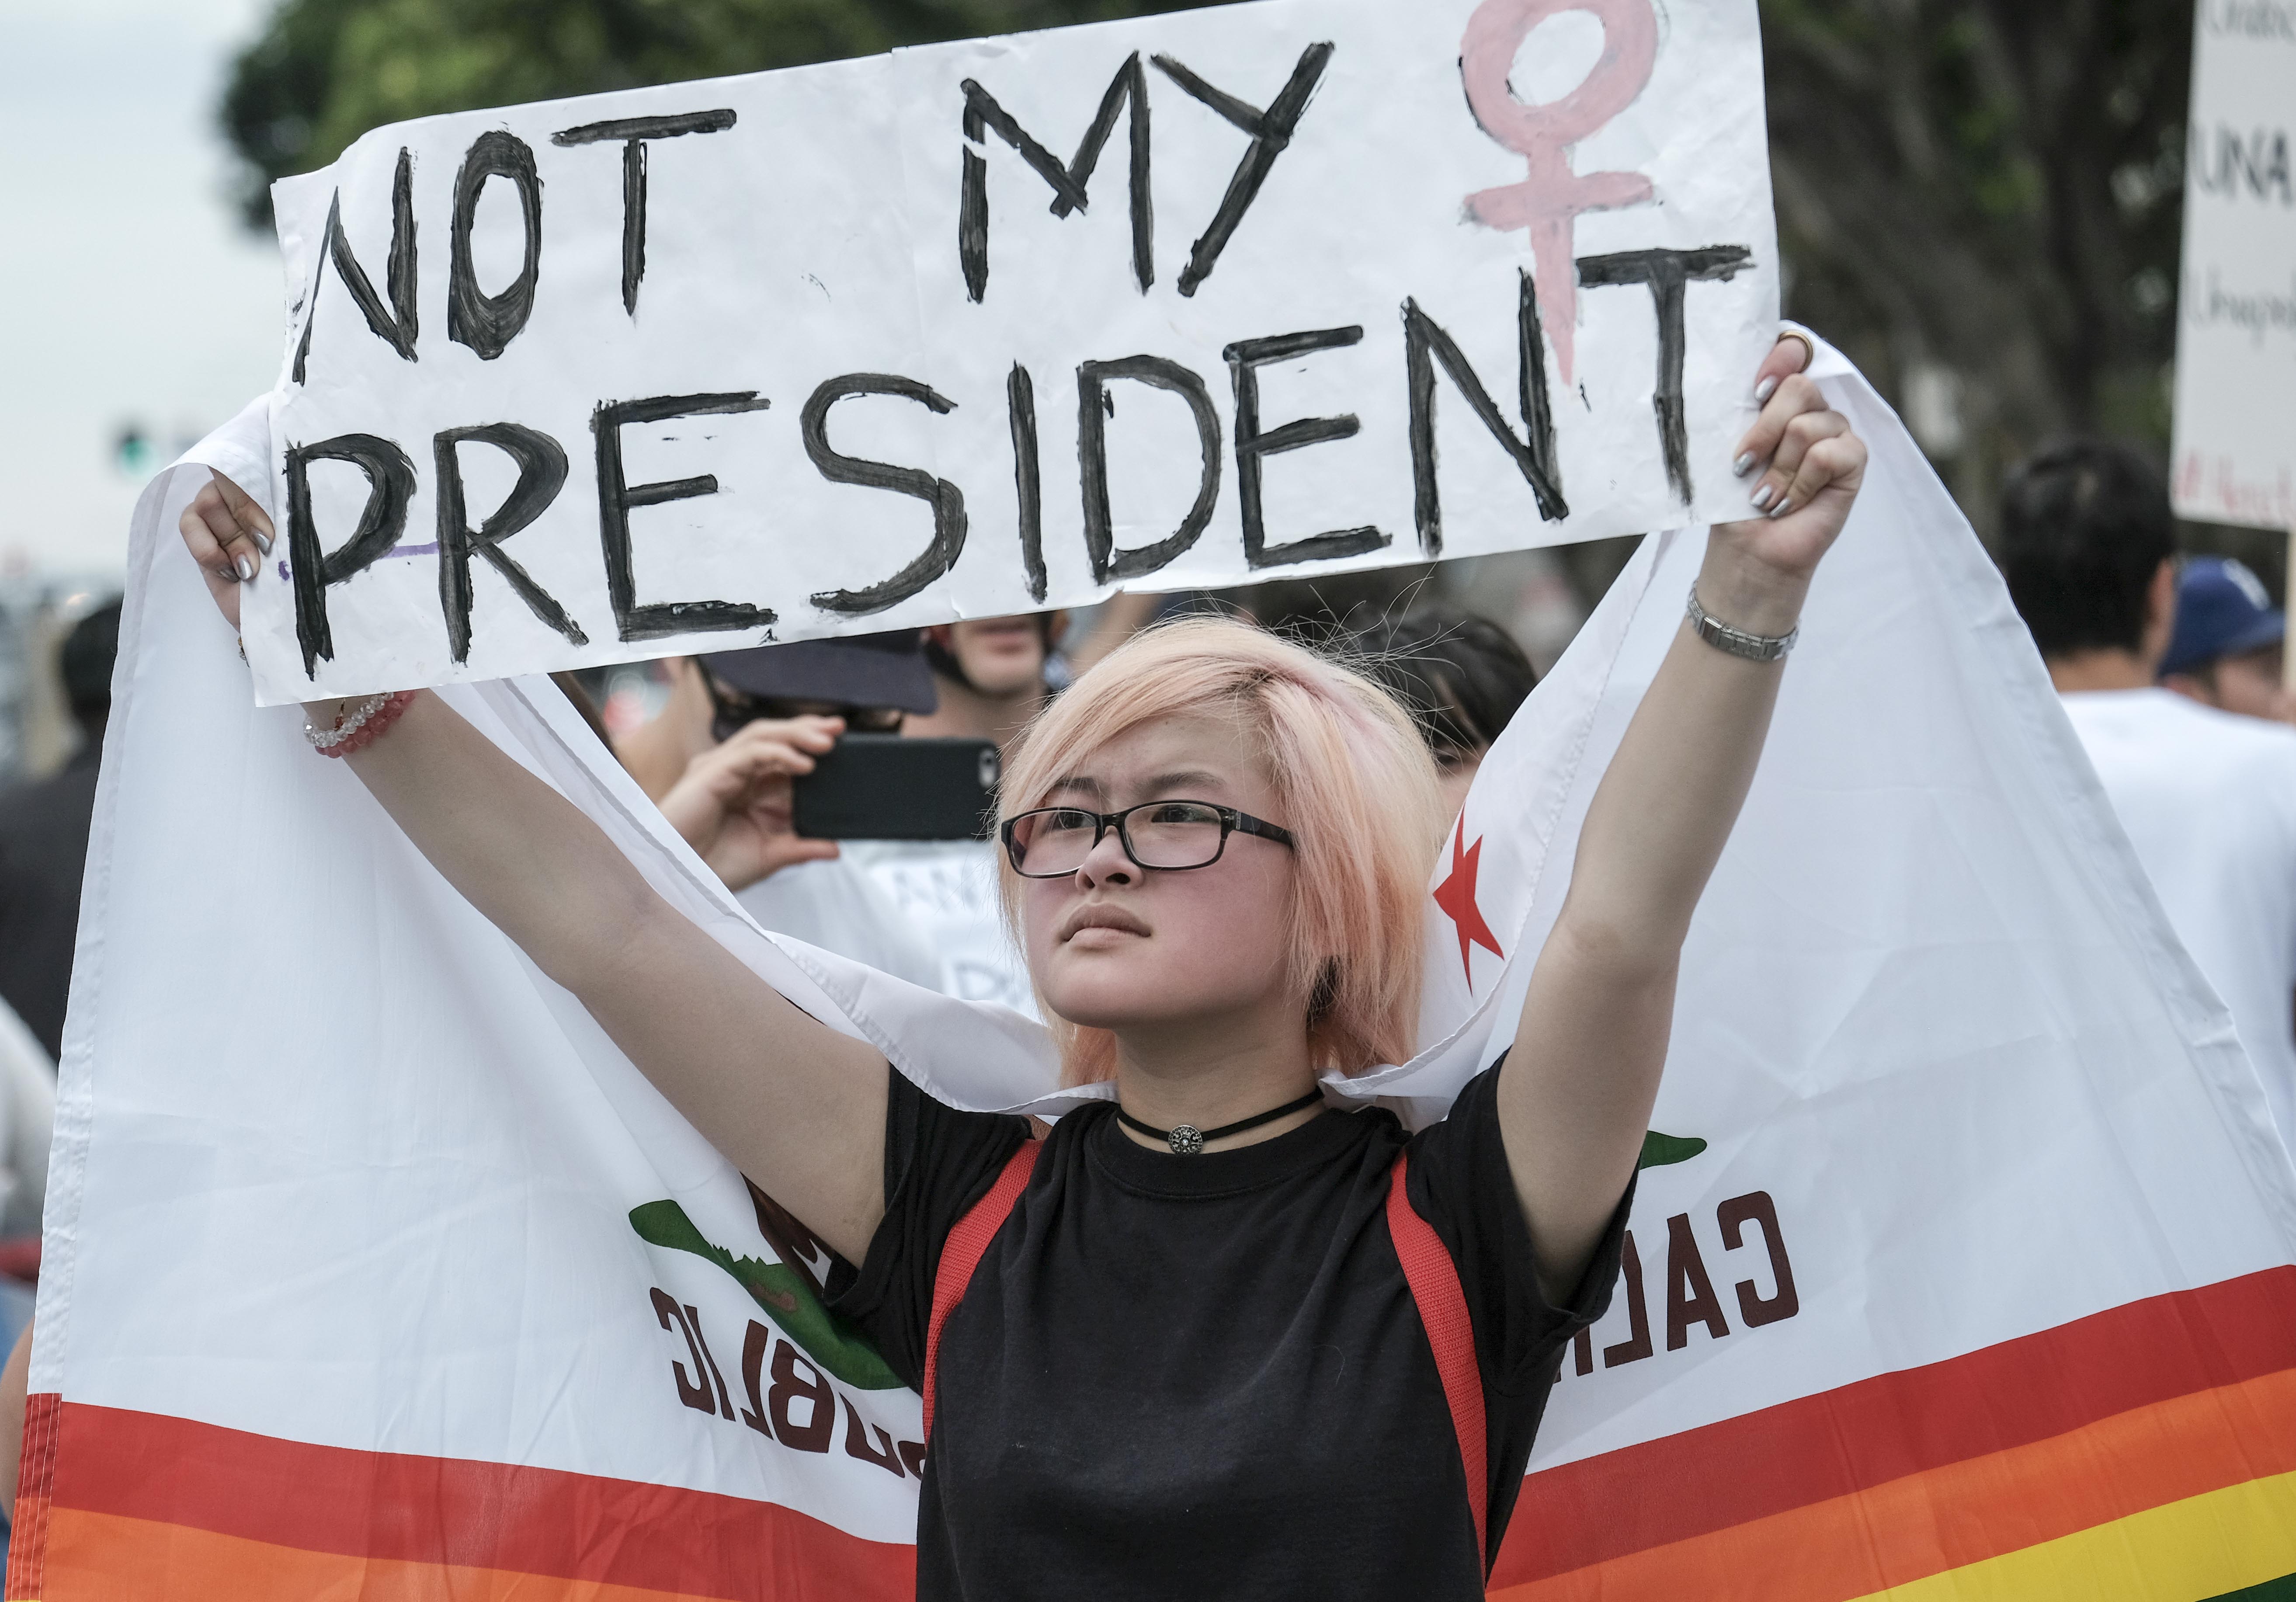 Demonstrators gather outside the Edward Roybal Federal Building to protest against US President-elect Donald Trump in Los Angeles on November 12, 2016. Americans spilled into the streets Saturday for a new day of protests against Donald Trump, even as the president-elect appeared to back away from the fiery rhetoric that propelled him to the White House. / AFP PHOTO / RINGO CHIU